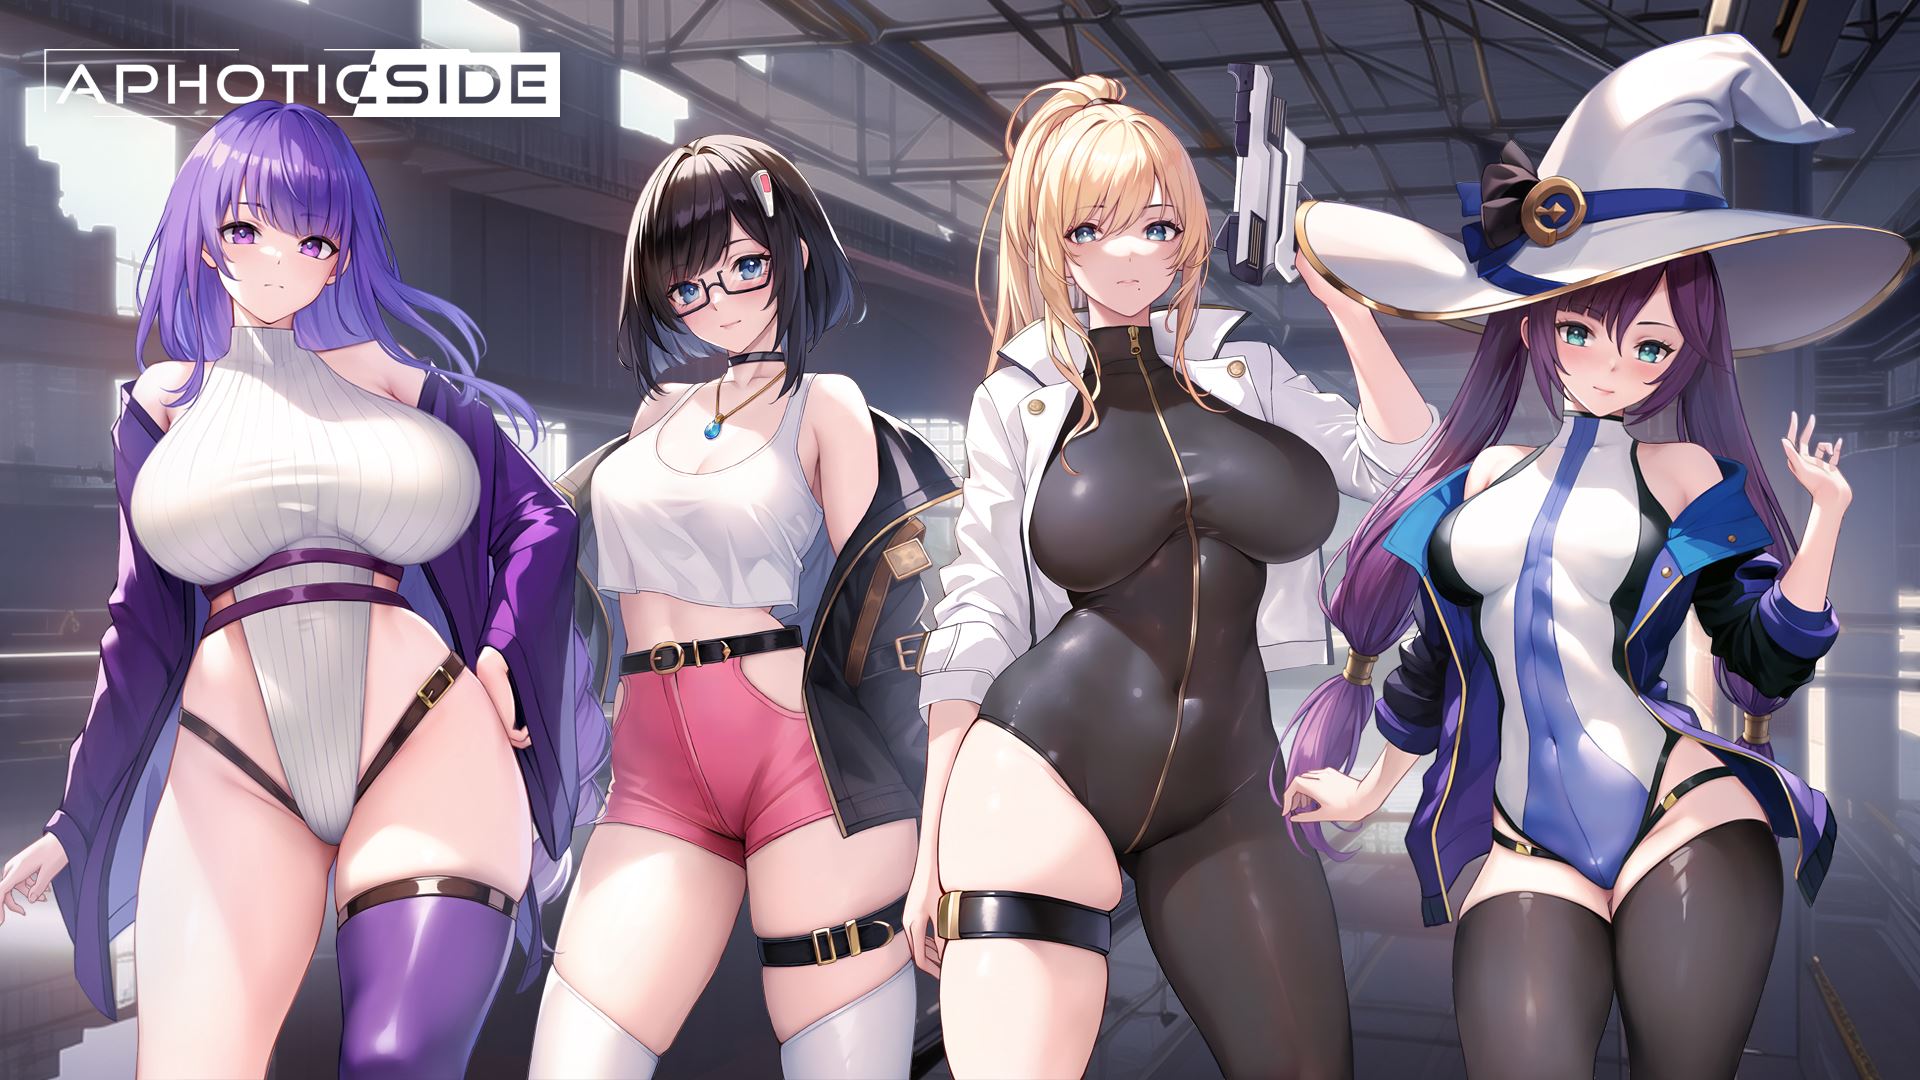 Aphotic Side porn xxx game download cover